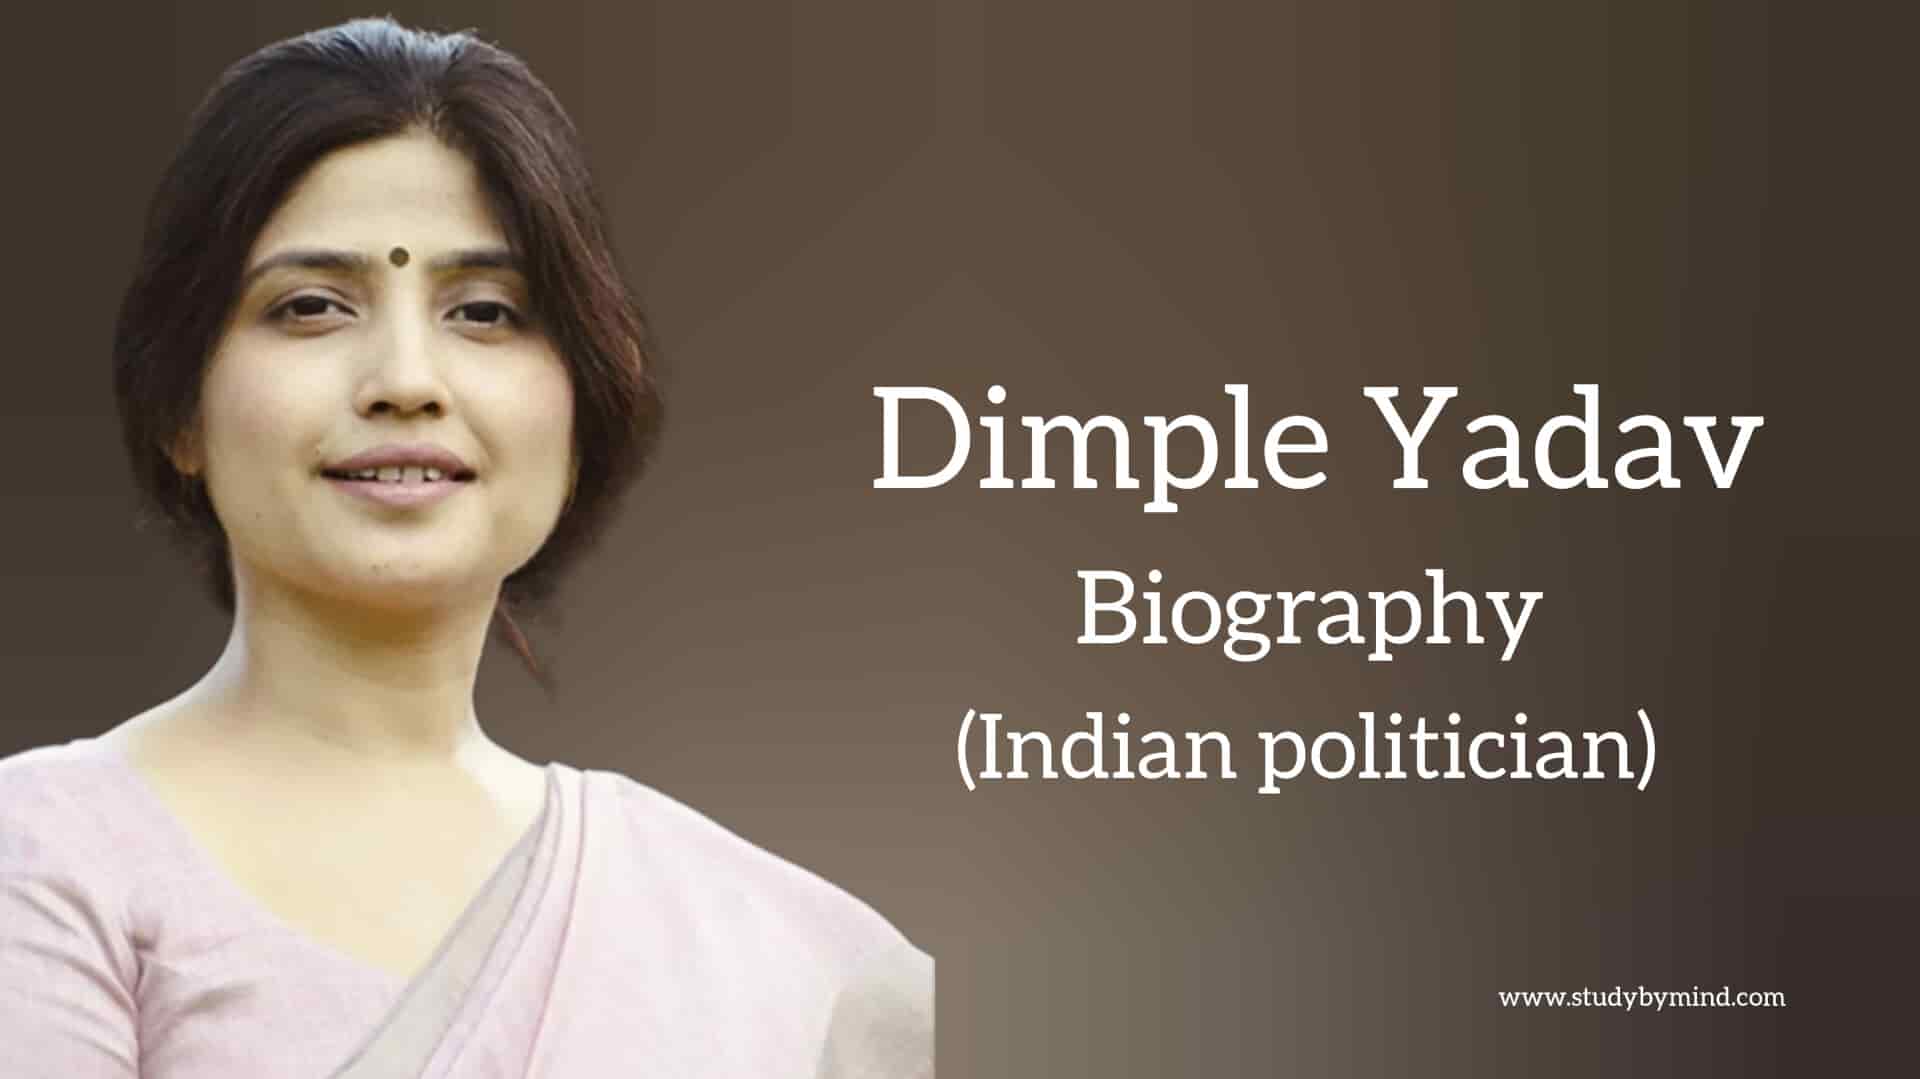 You are currently viewing Dimple yadav biography in english (Indian Politician)